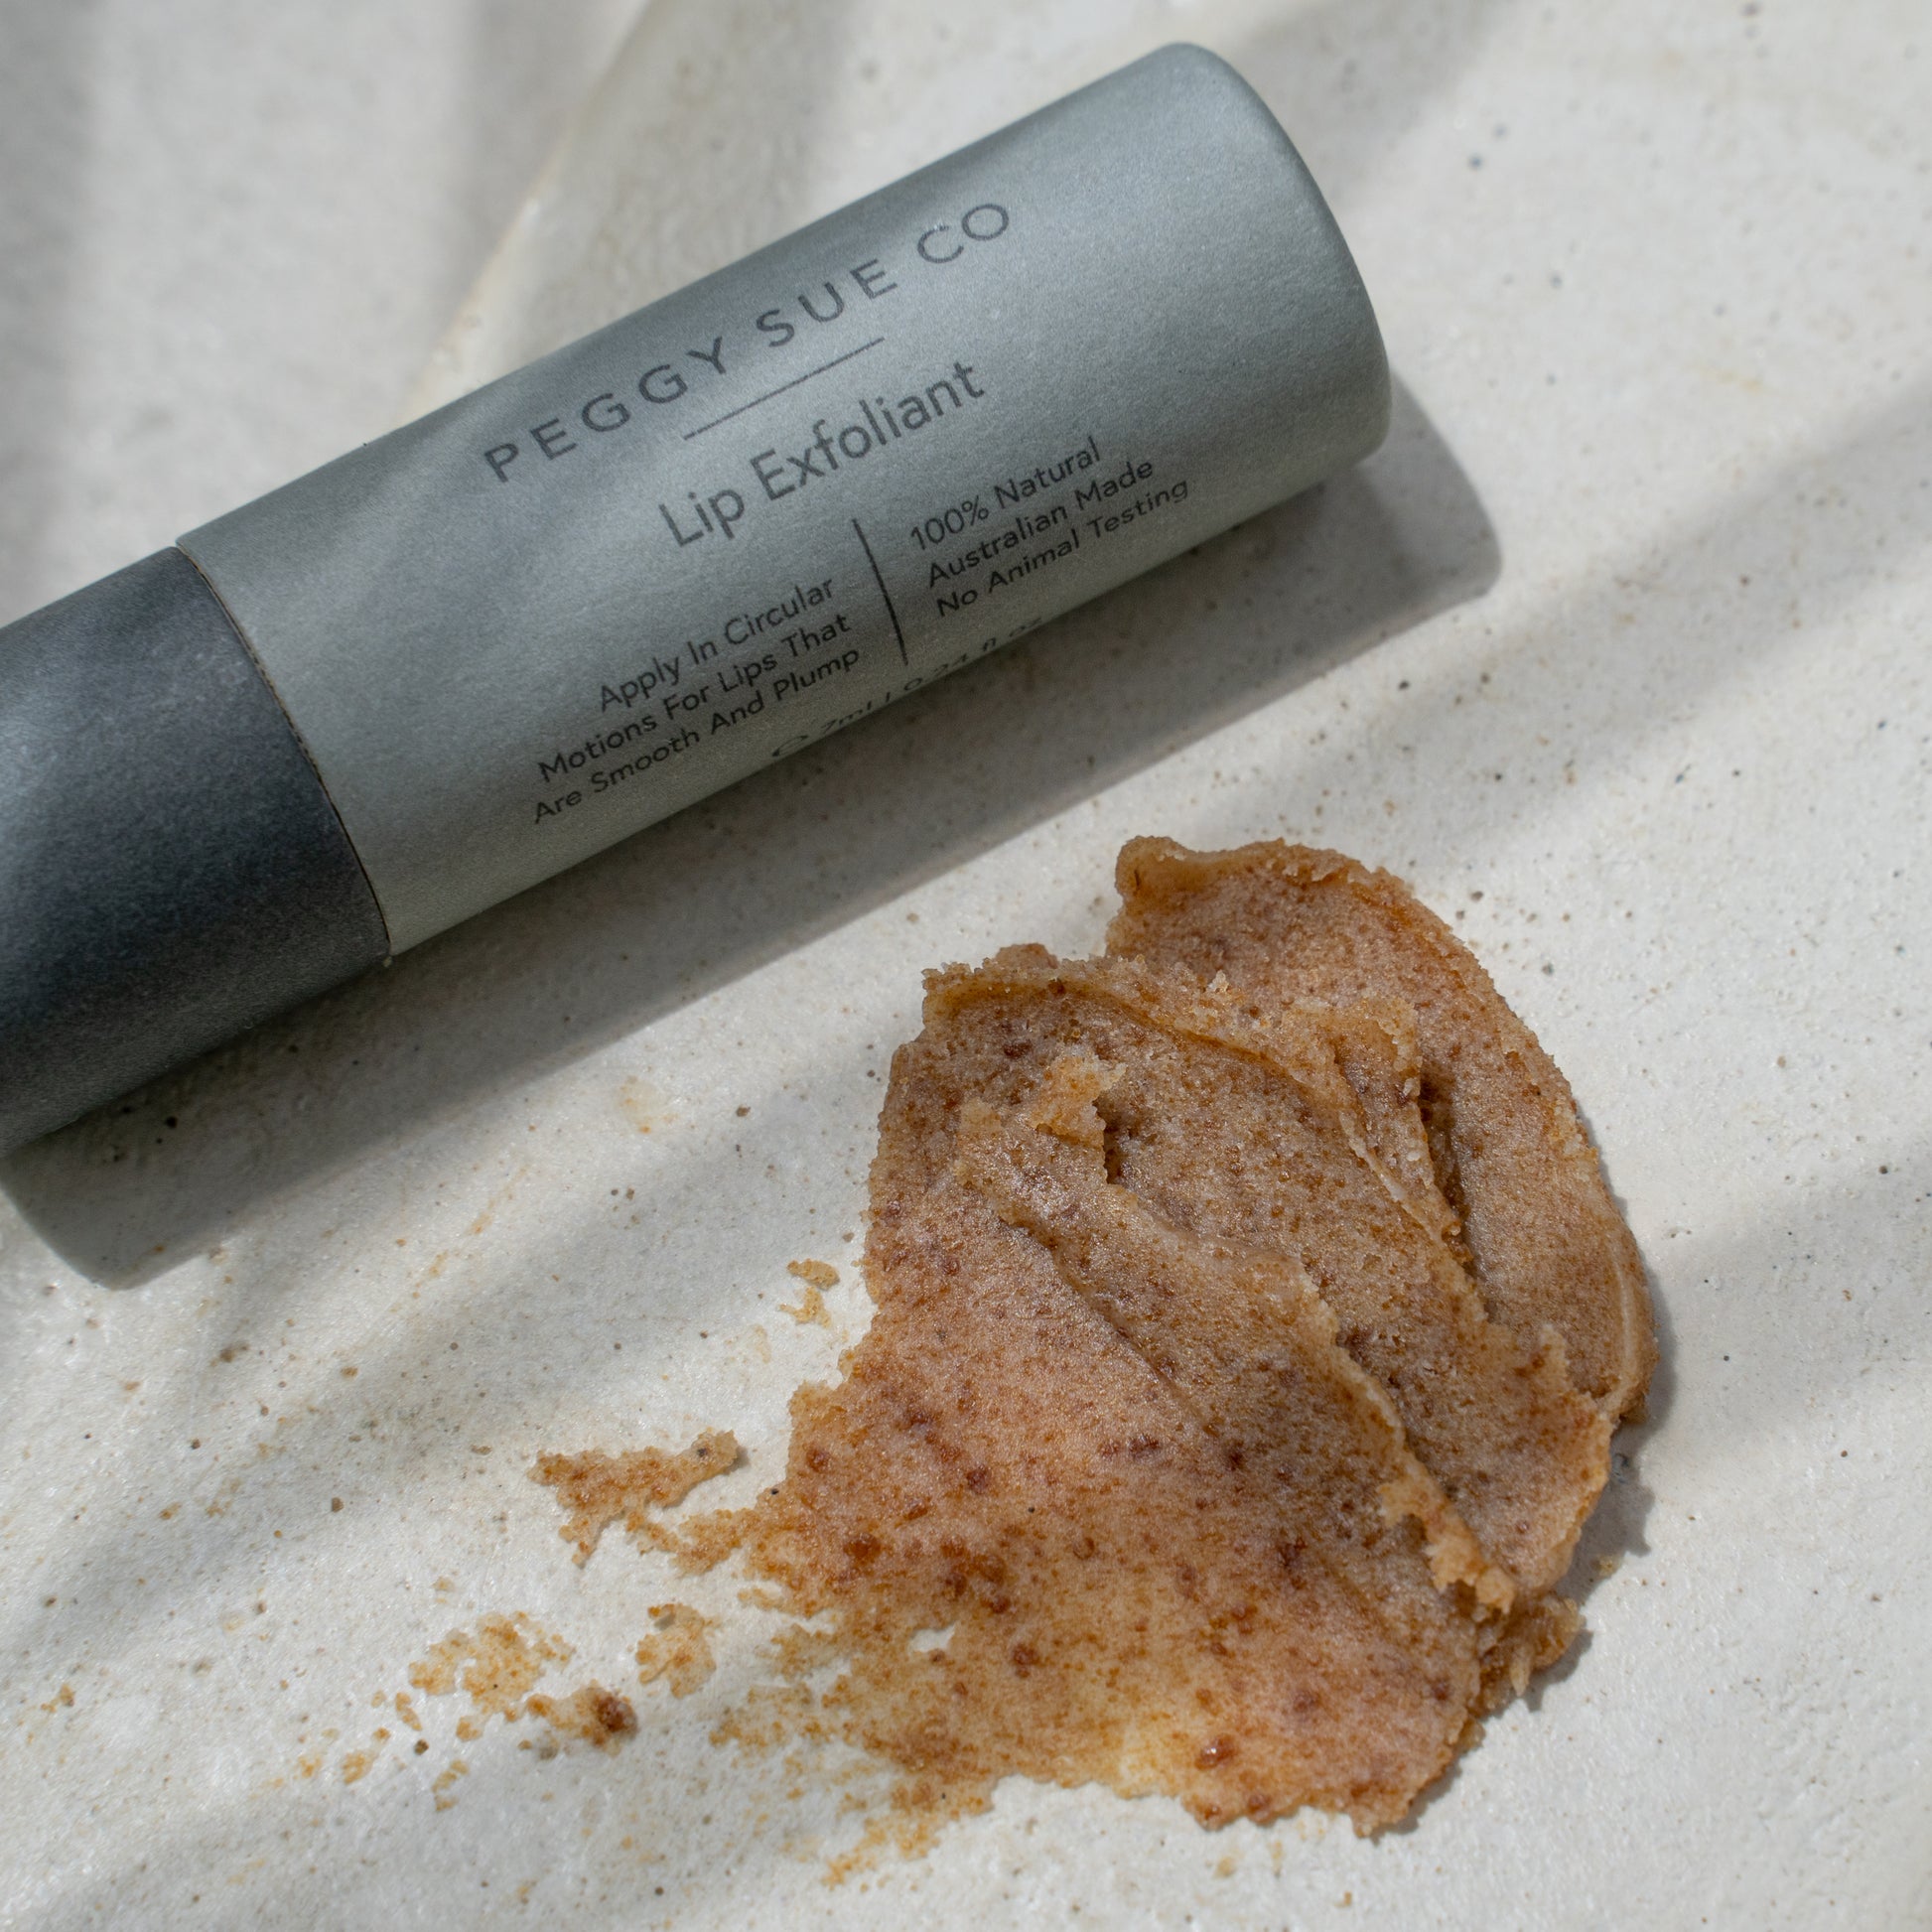 Our softening Lip Exfoliant is a beautiful blend of natural, vitamin-rich ingredients such as shea butter, olive oil and vitamin E that work to deeply nourish and restore lips, while the coconut sugar works to boost blood circulation while gently exfoliating away dry skin layers helping your lips to feel silky soft and plump.